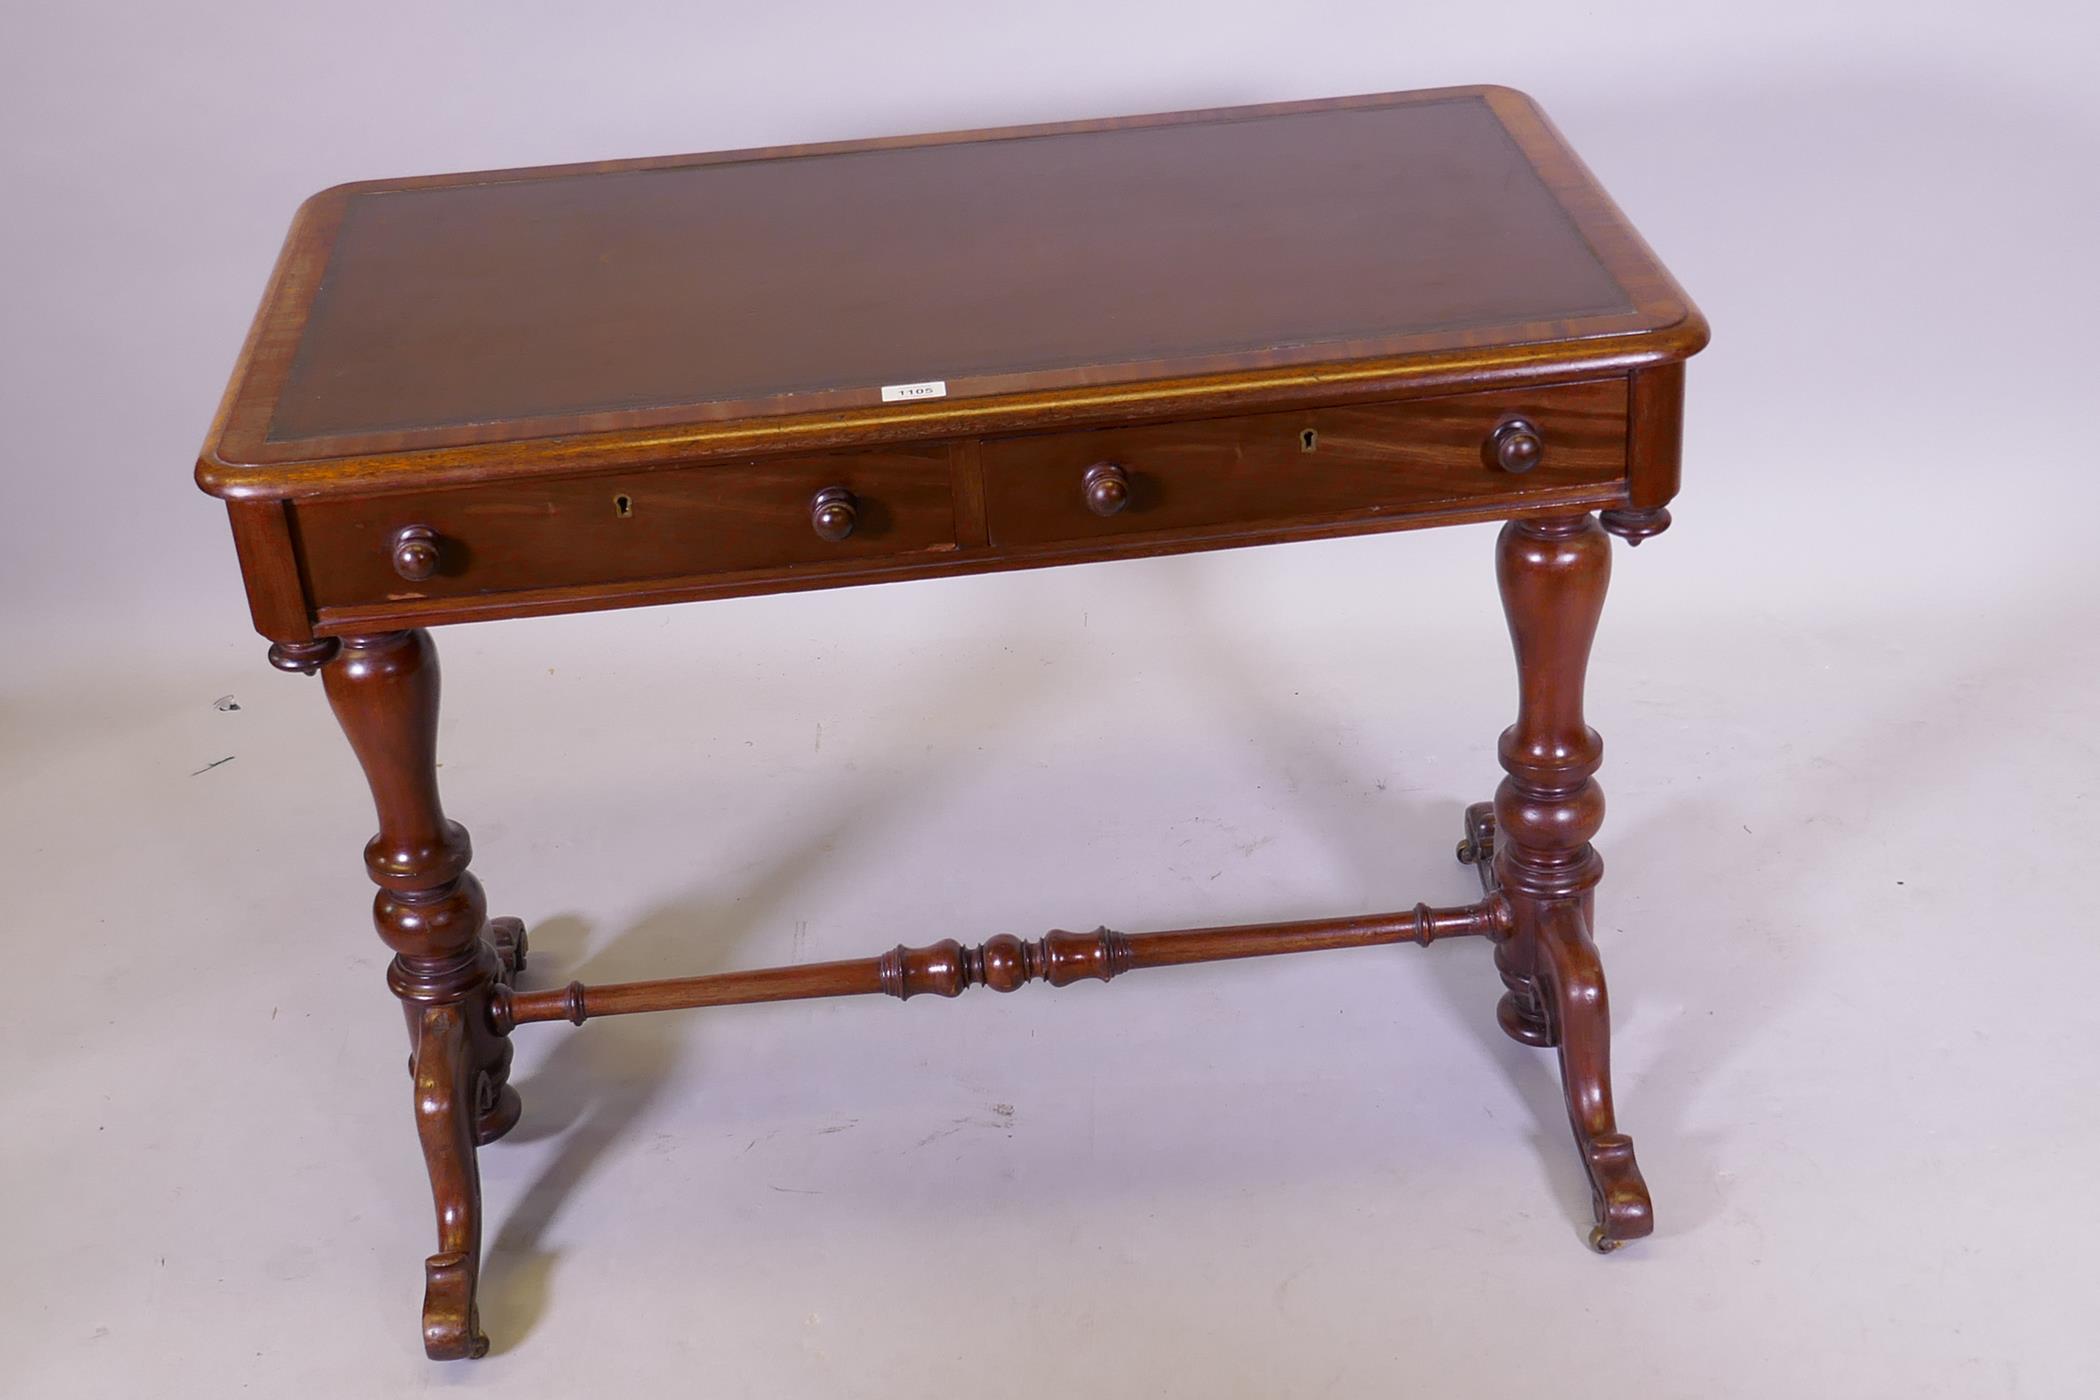 A C19th mahogany writing table with two true and two false drawers, and inset top, raised on - Image 2 of 3